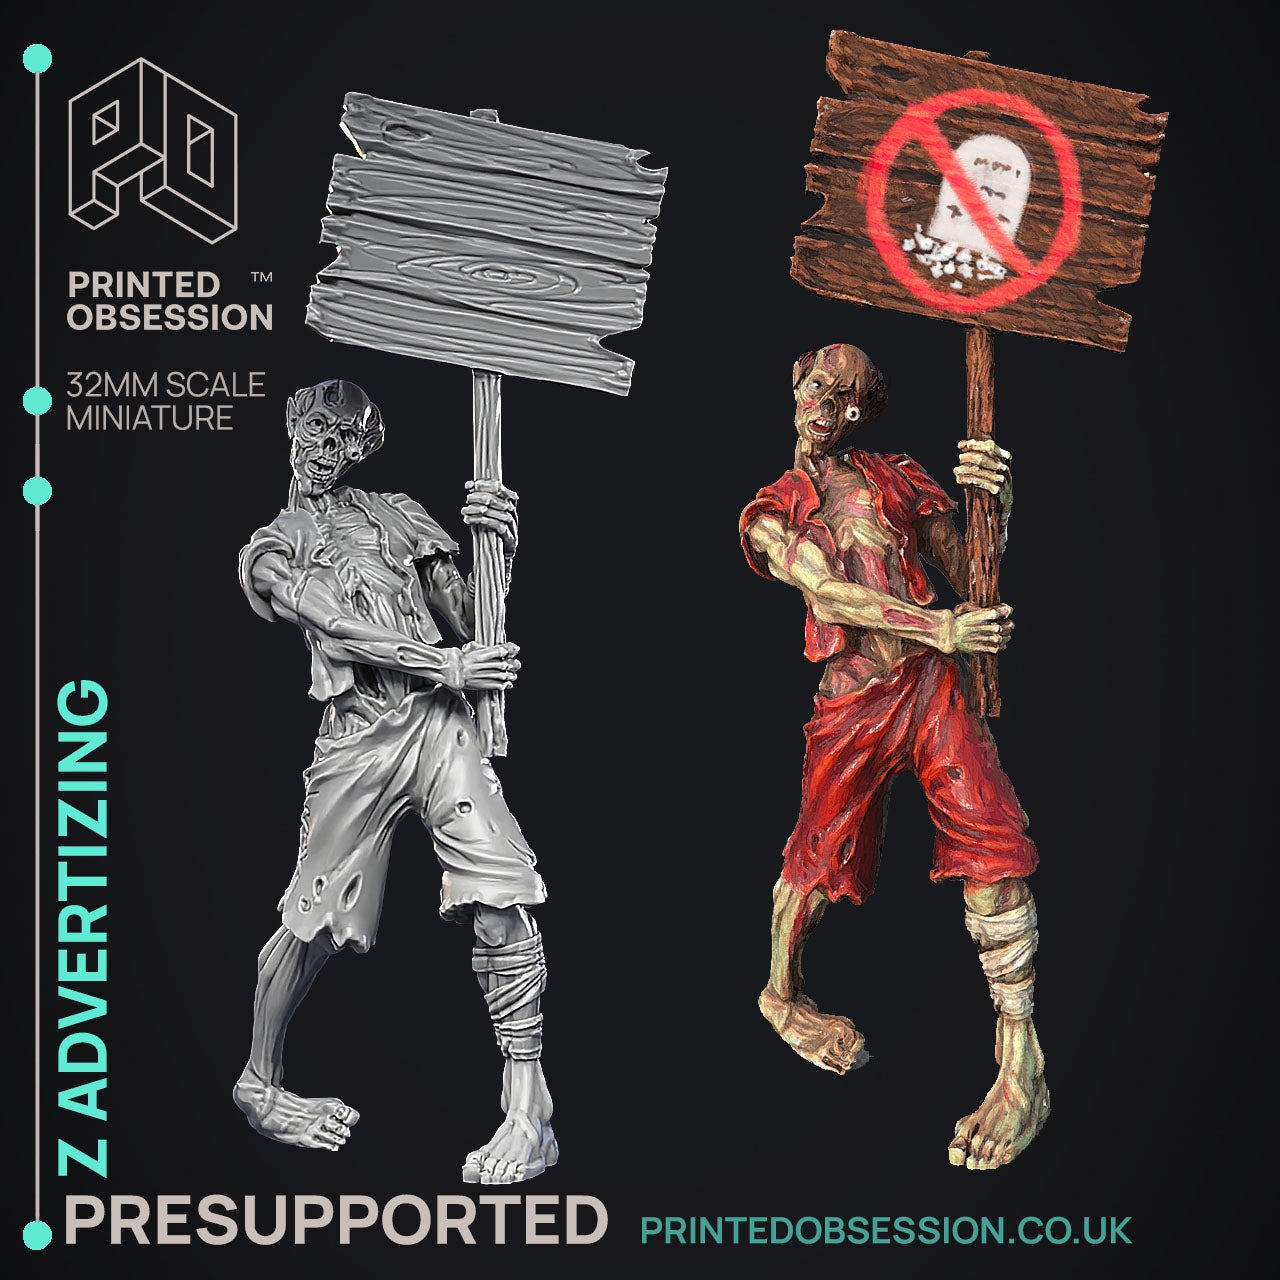 Zombie Advertising - The Discus World - The Printed Obsession - Table-top mini, 3D Printed Collectable for painting and playing!